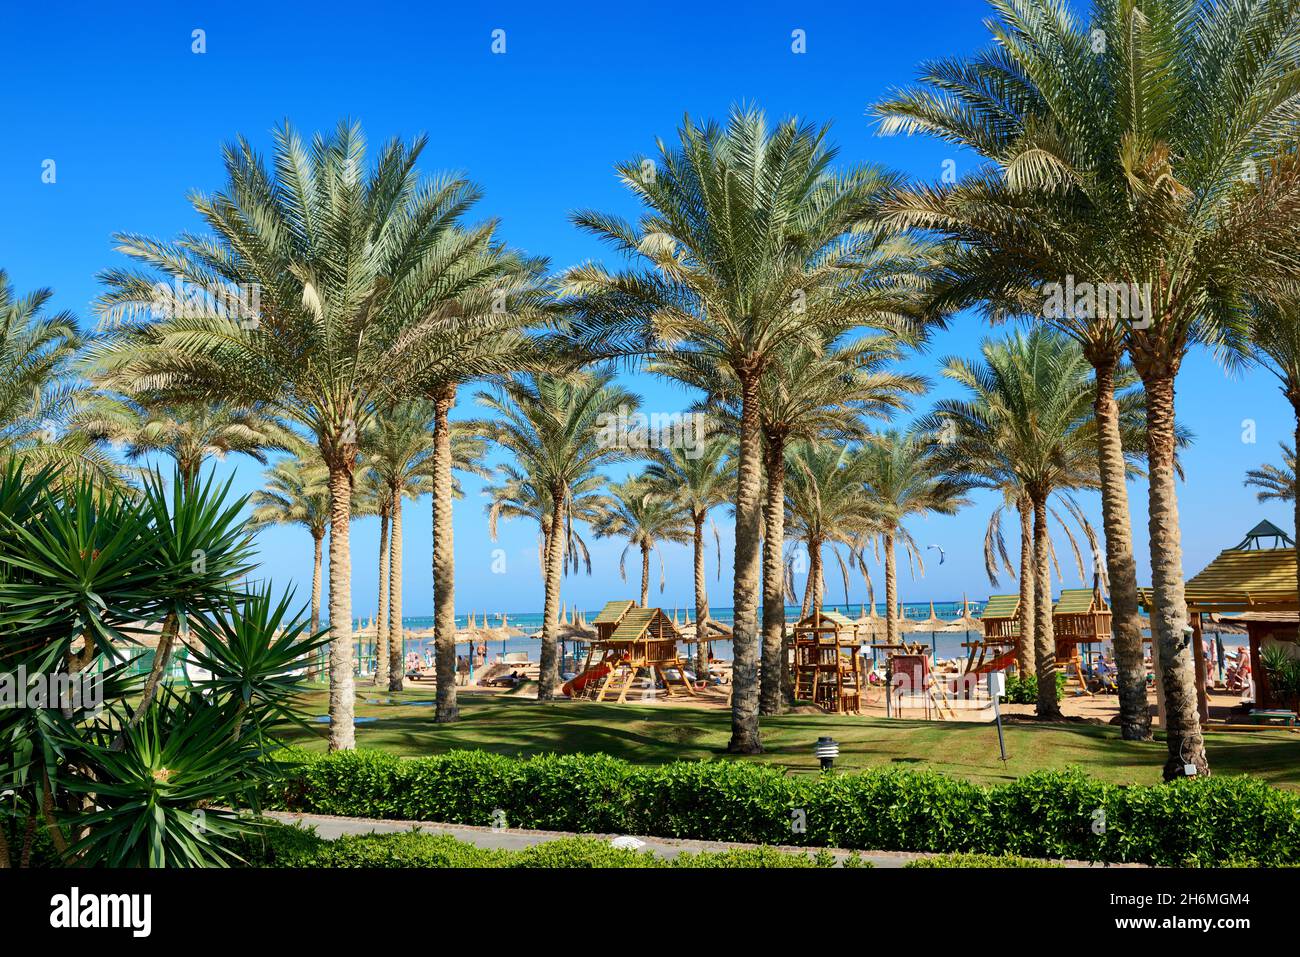 The beach of luxury hotel with palm trees, Sharm el Sheikh, Egypt Stock Photo